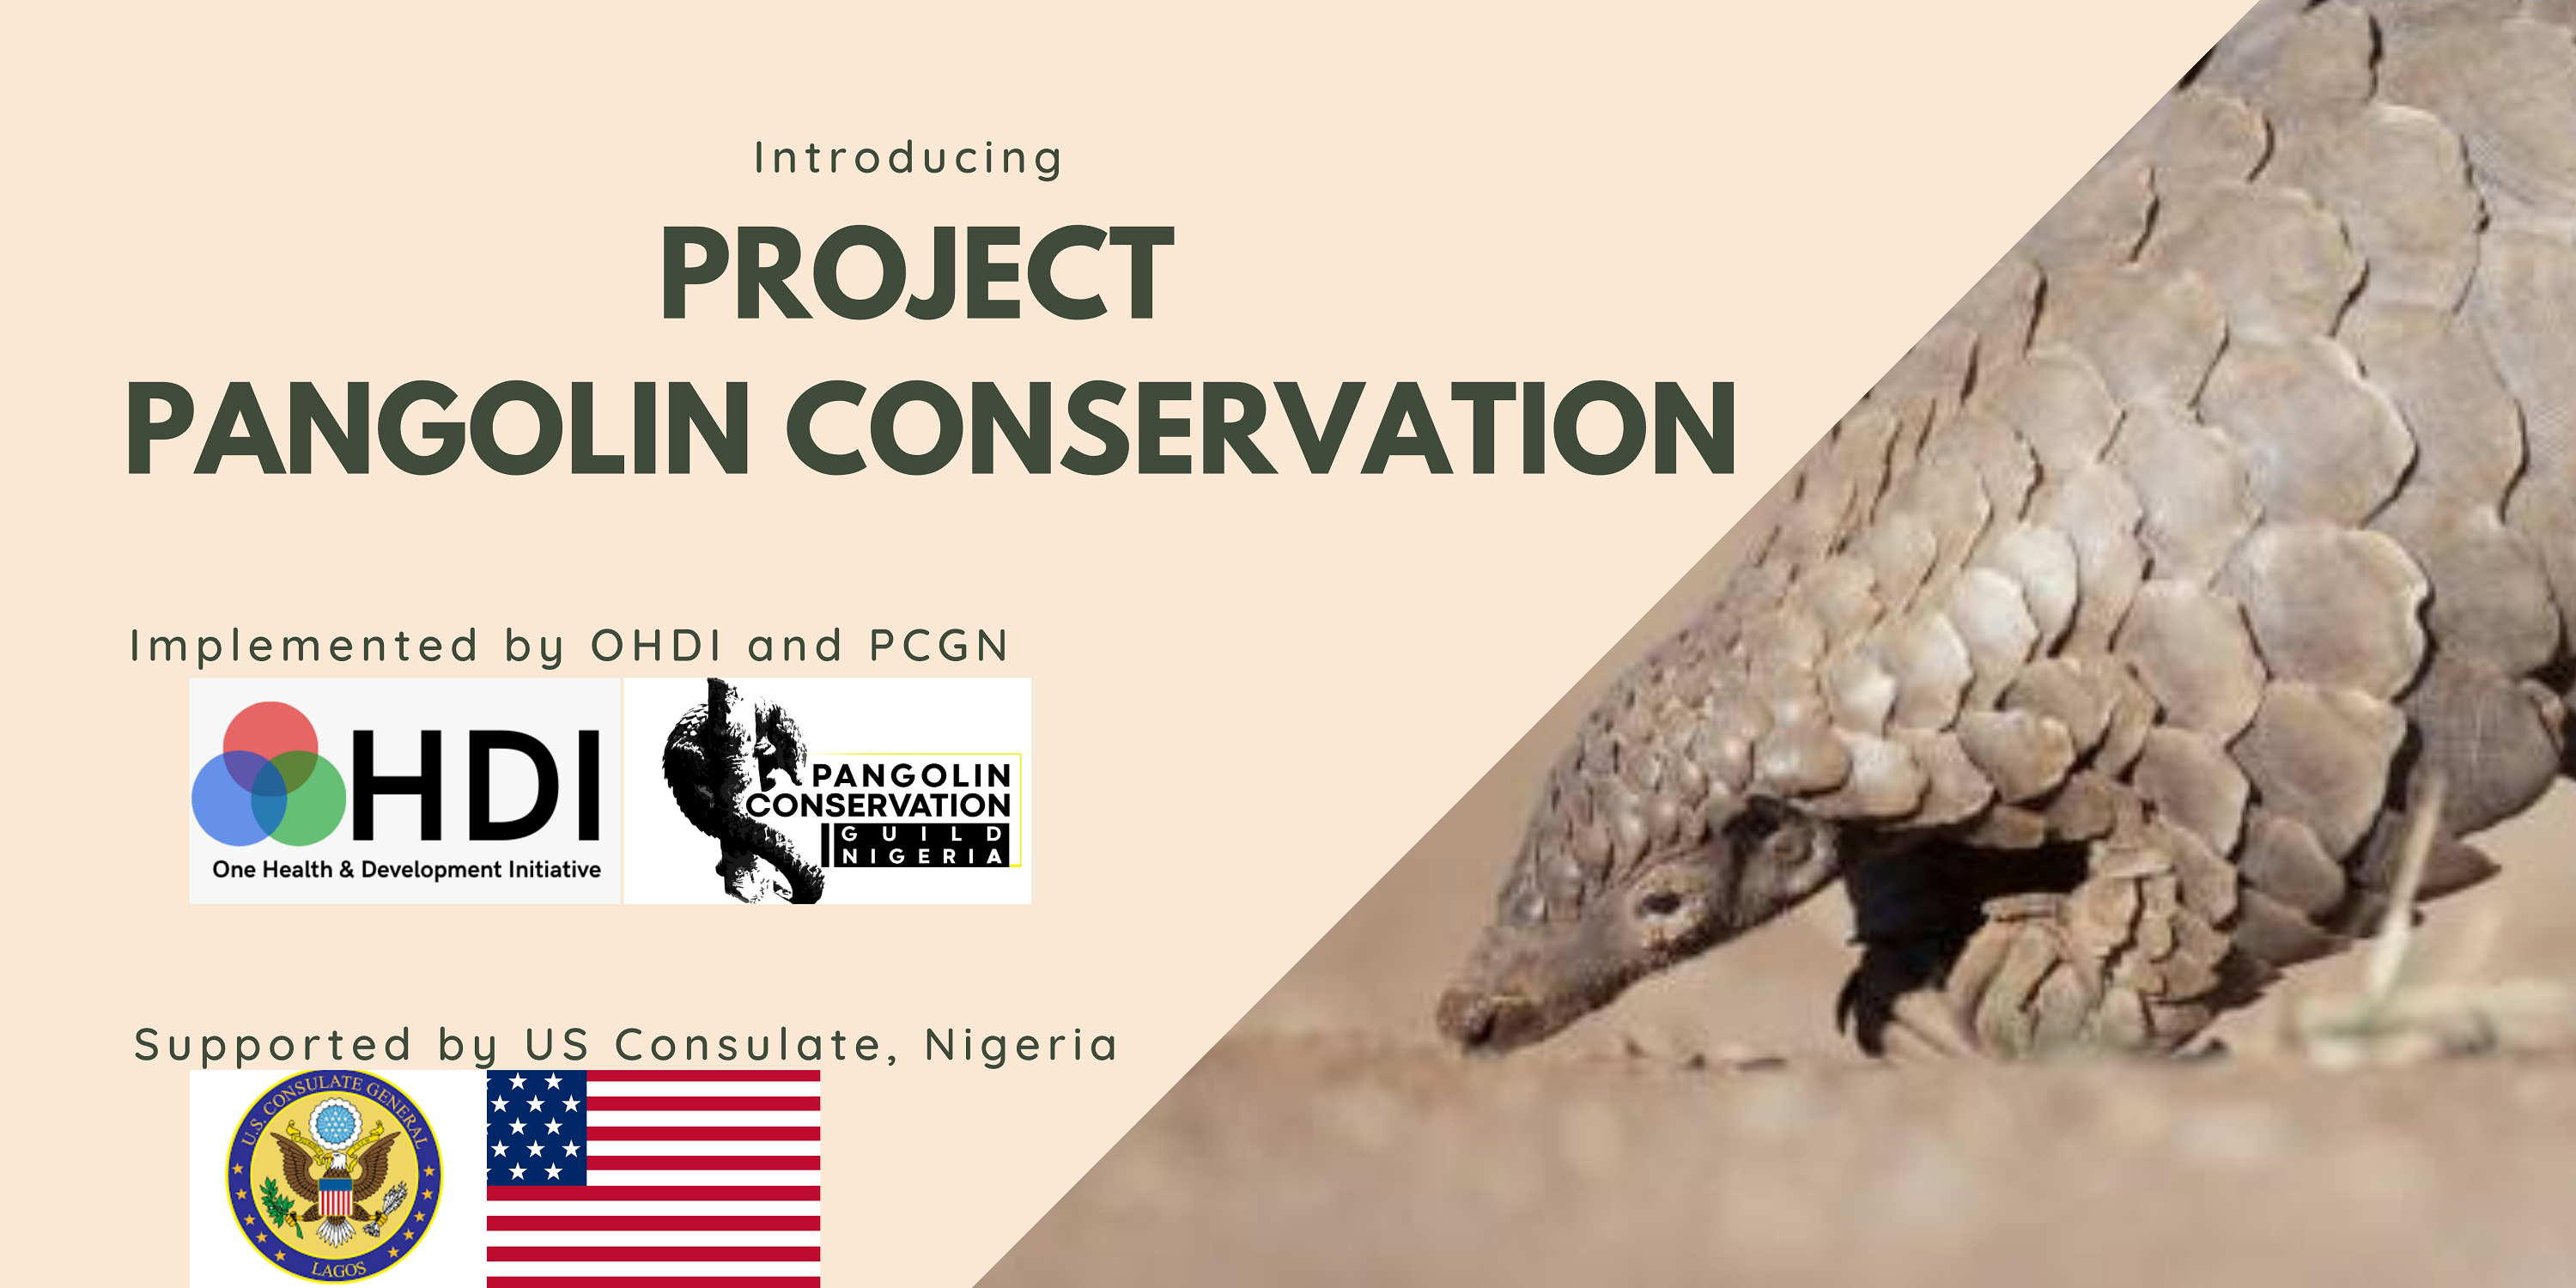 Project Pangolin Conservation